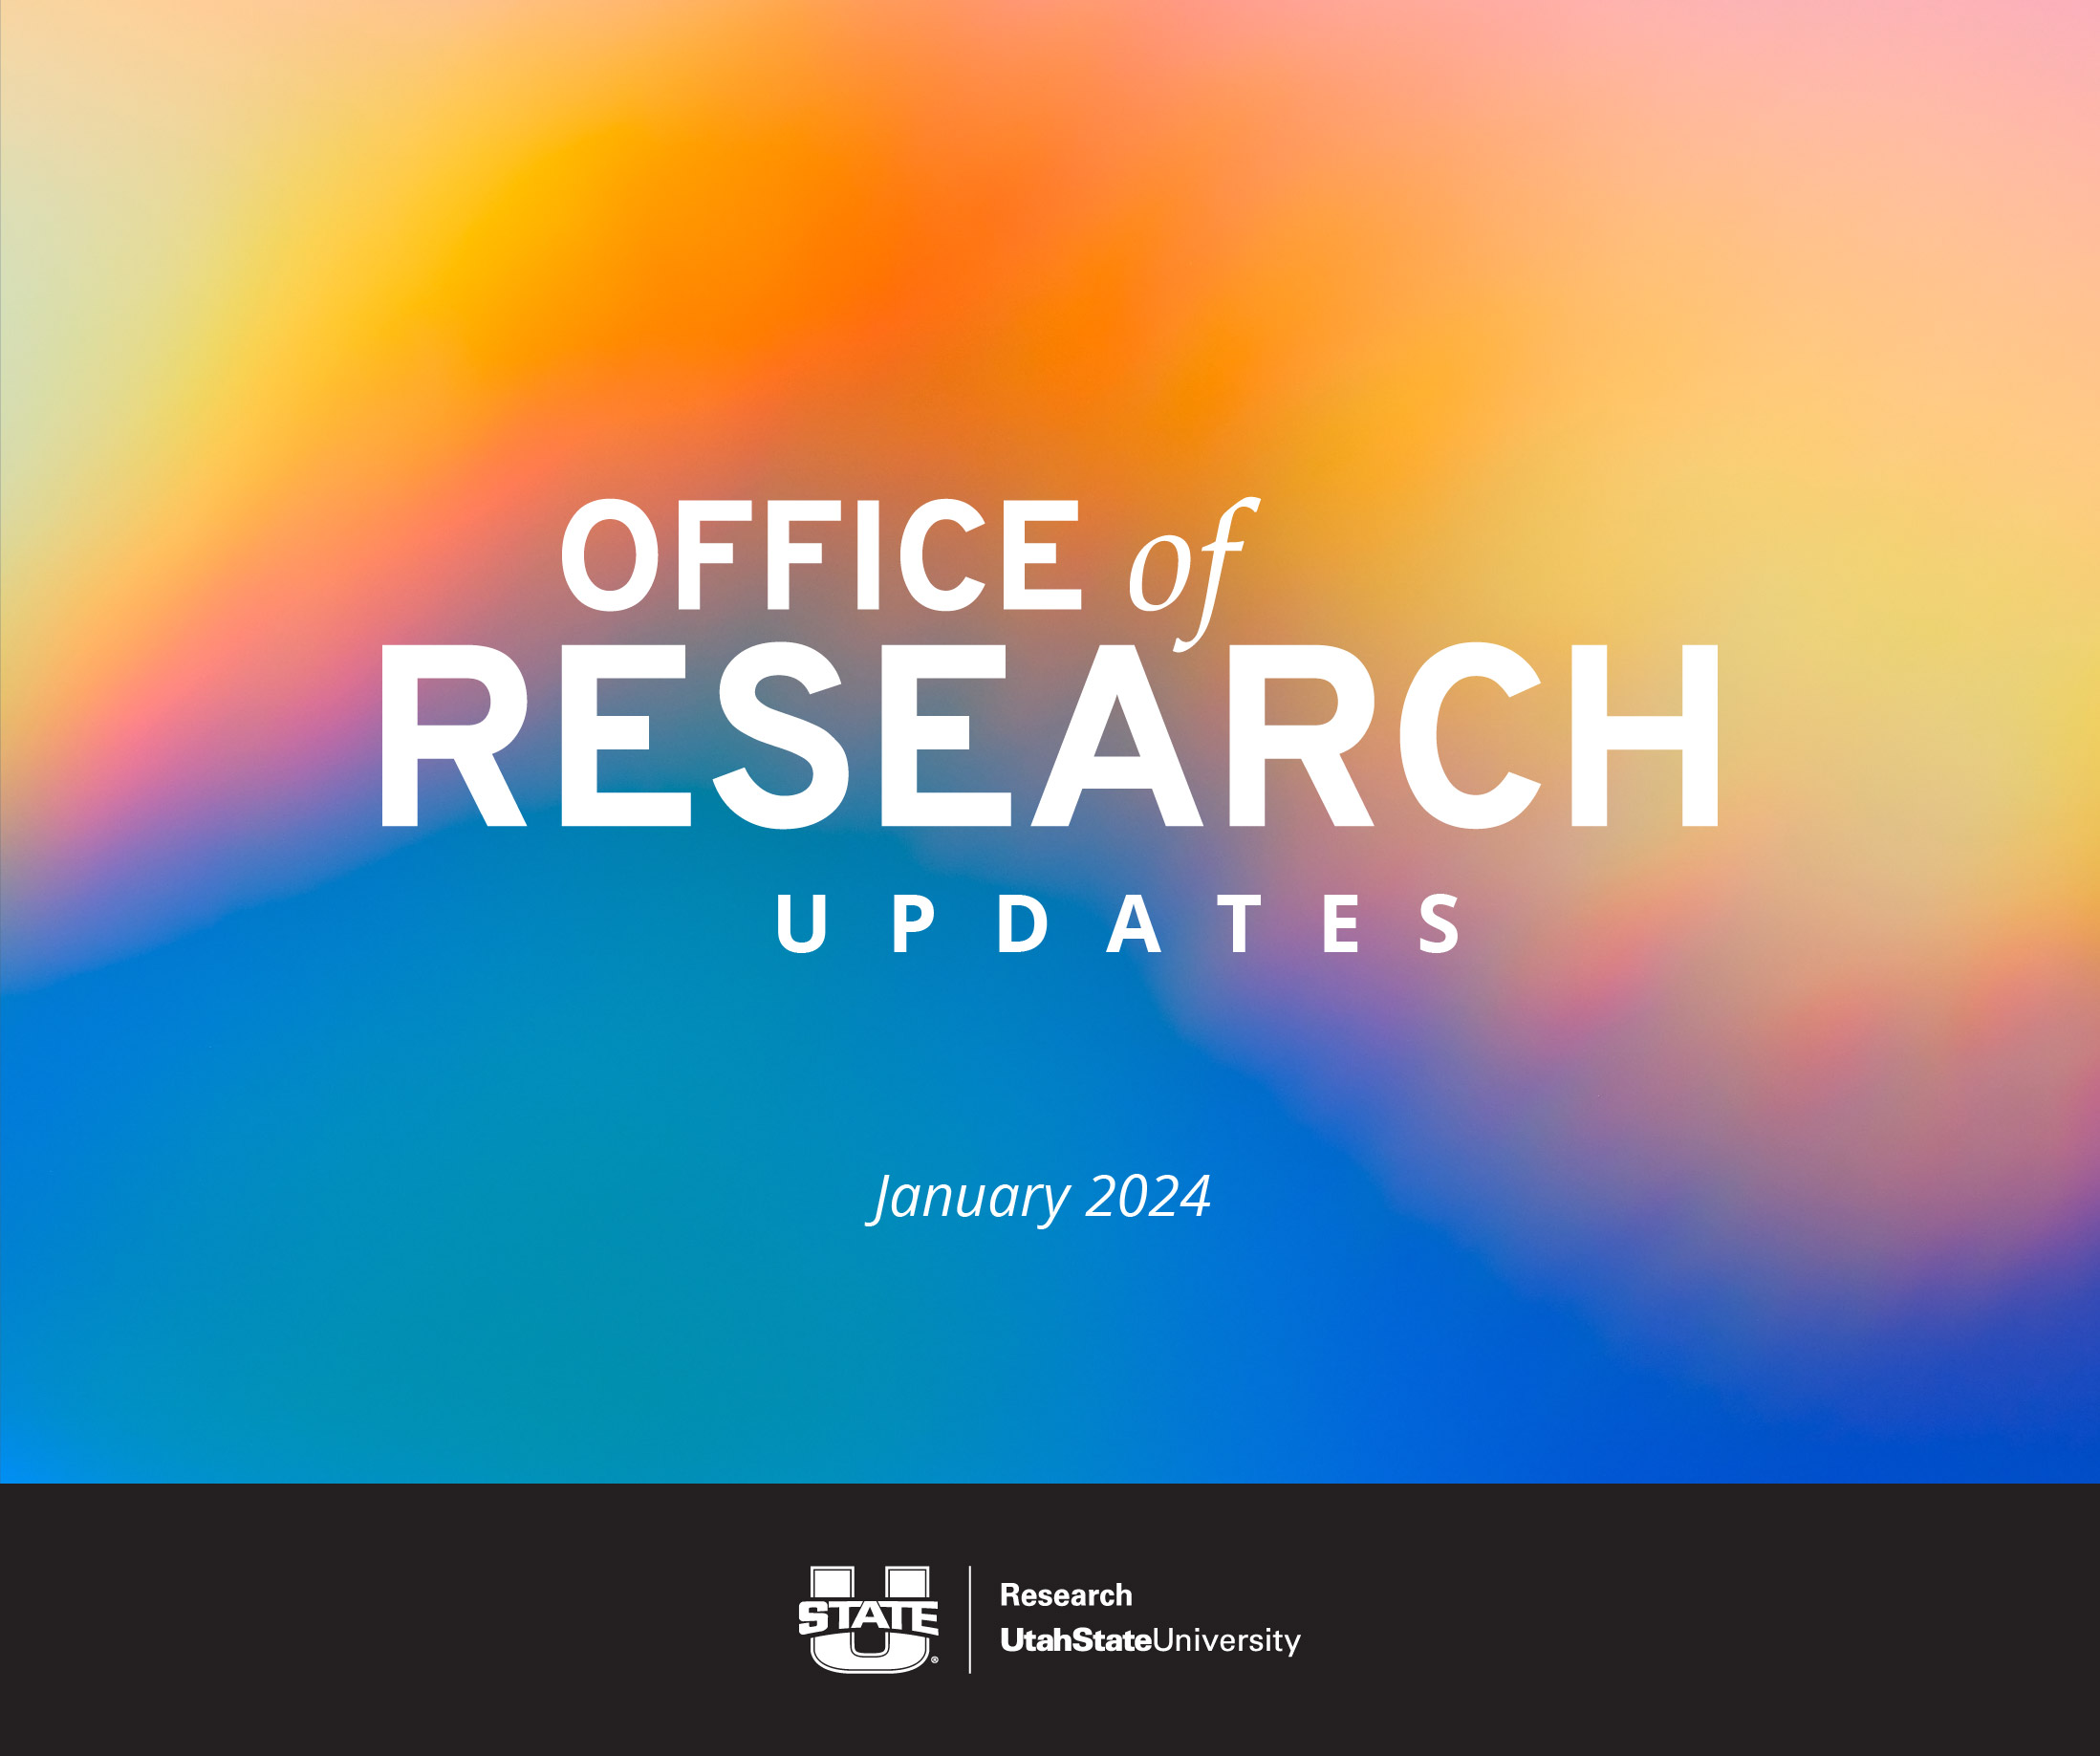 Office of research updated January 2024